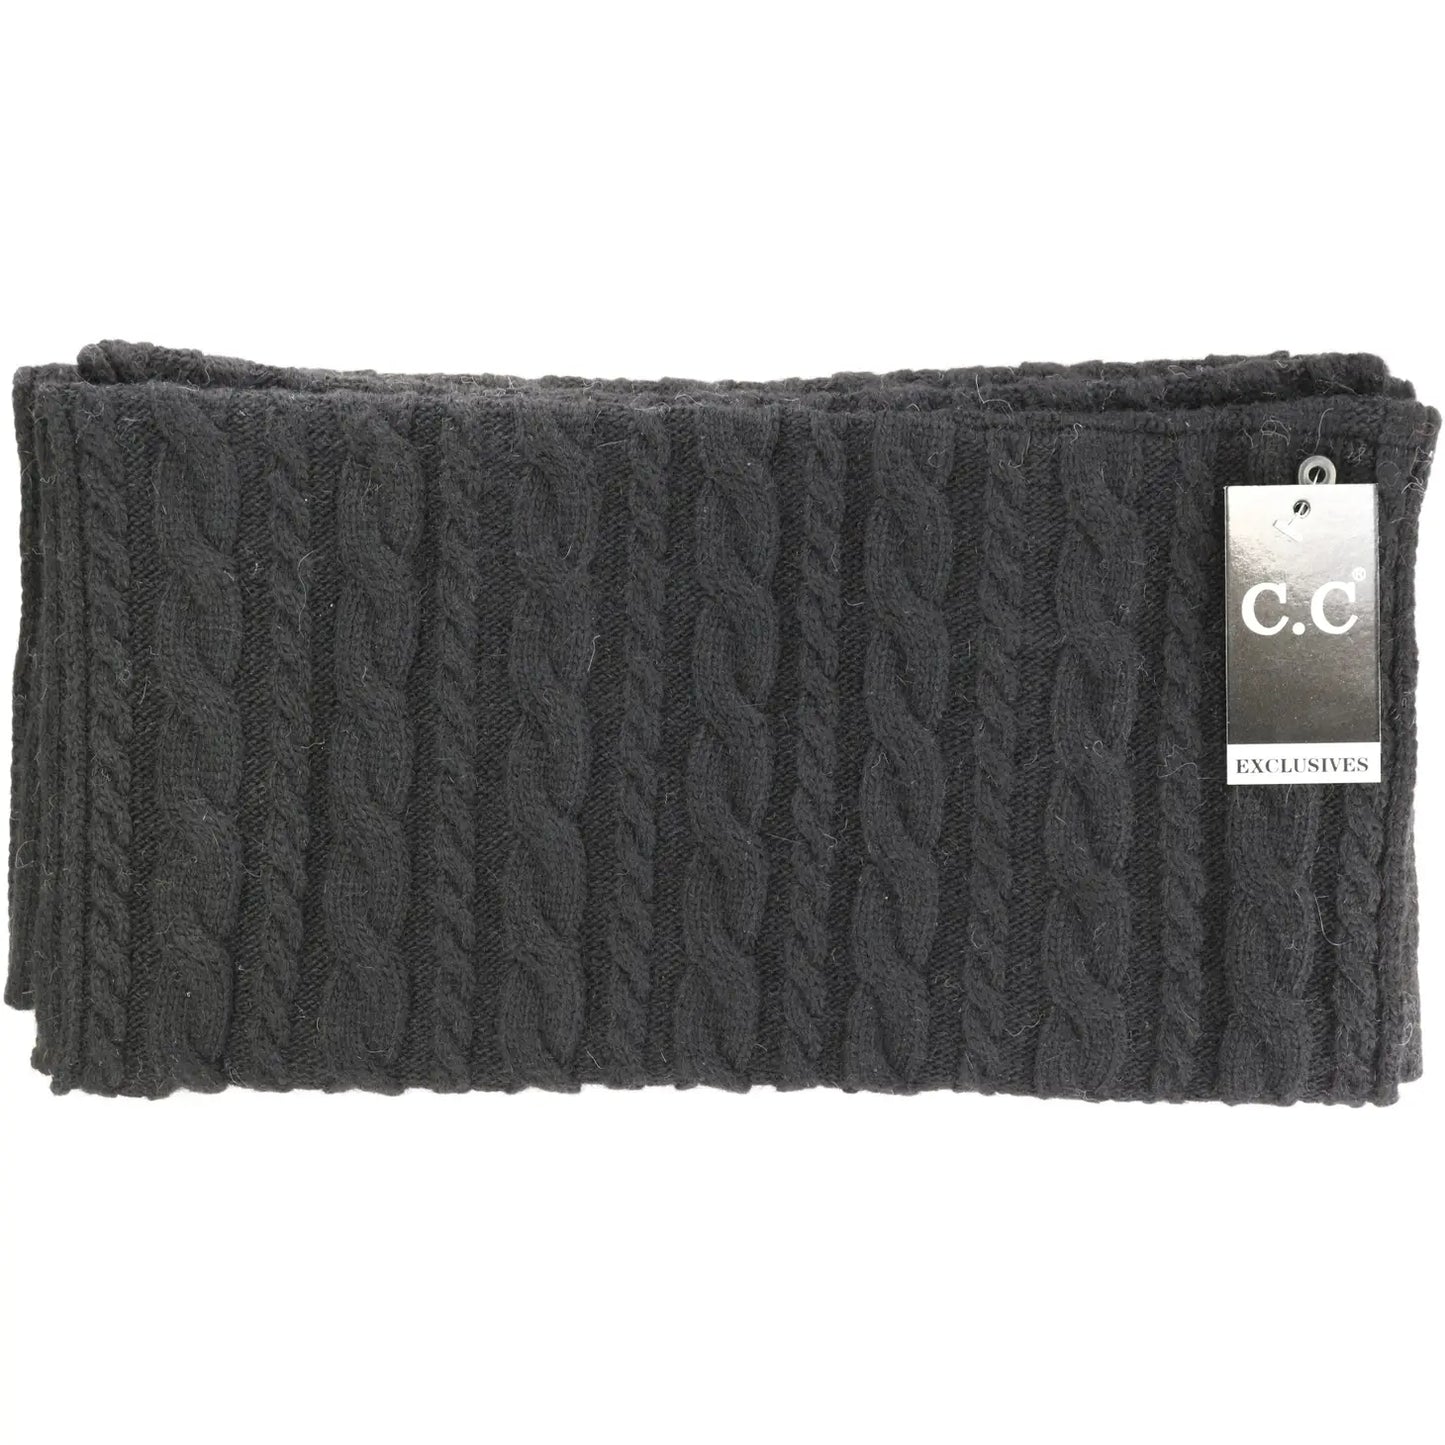 Cc Exclusive-Black Label Cable Knit Cc Infinity Scarf